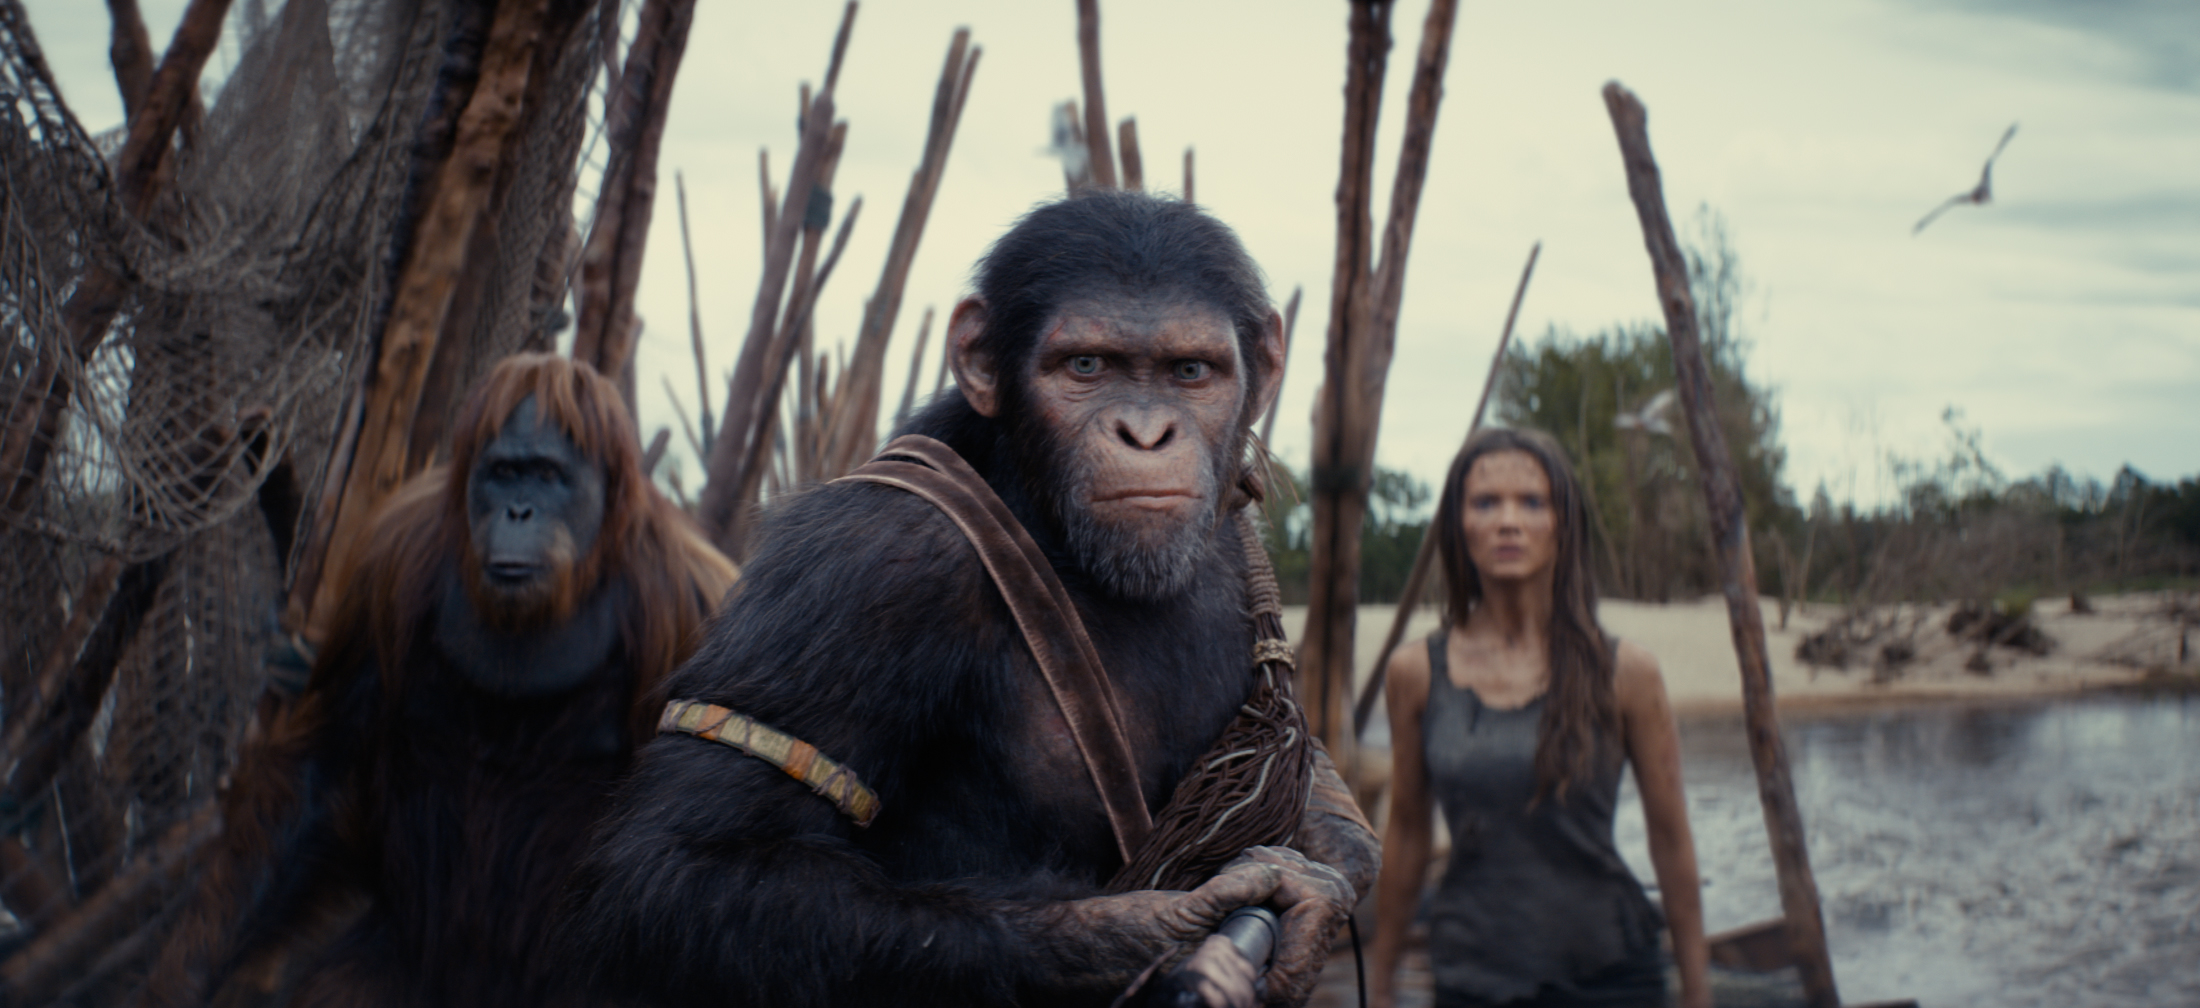 Caesar and Maurice from &quot;Planet of the Apes&quot; with a woman on a shore, looking determined